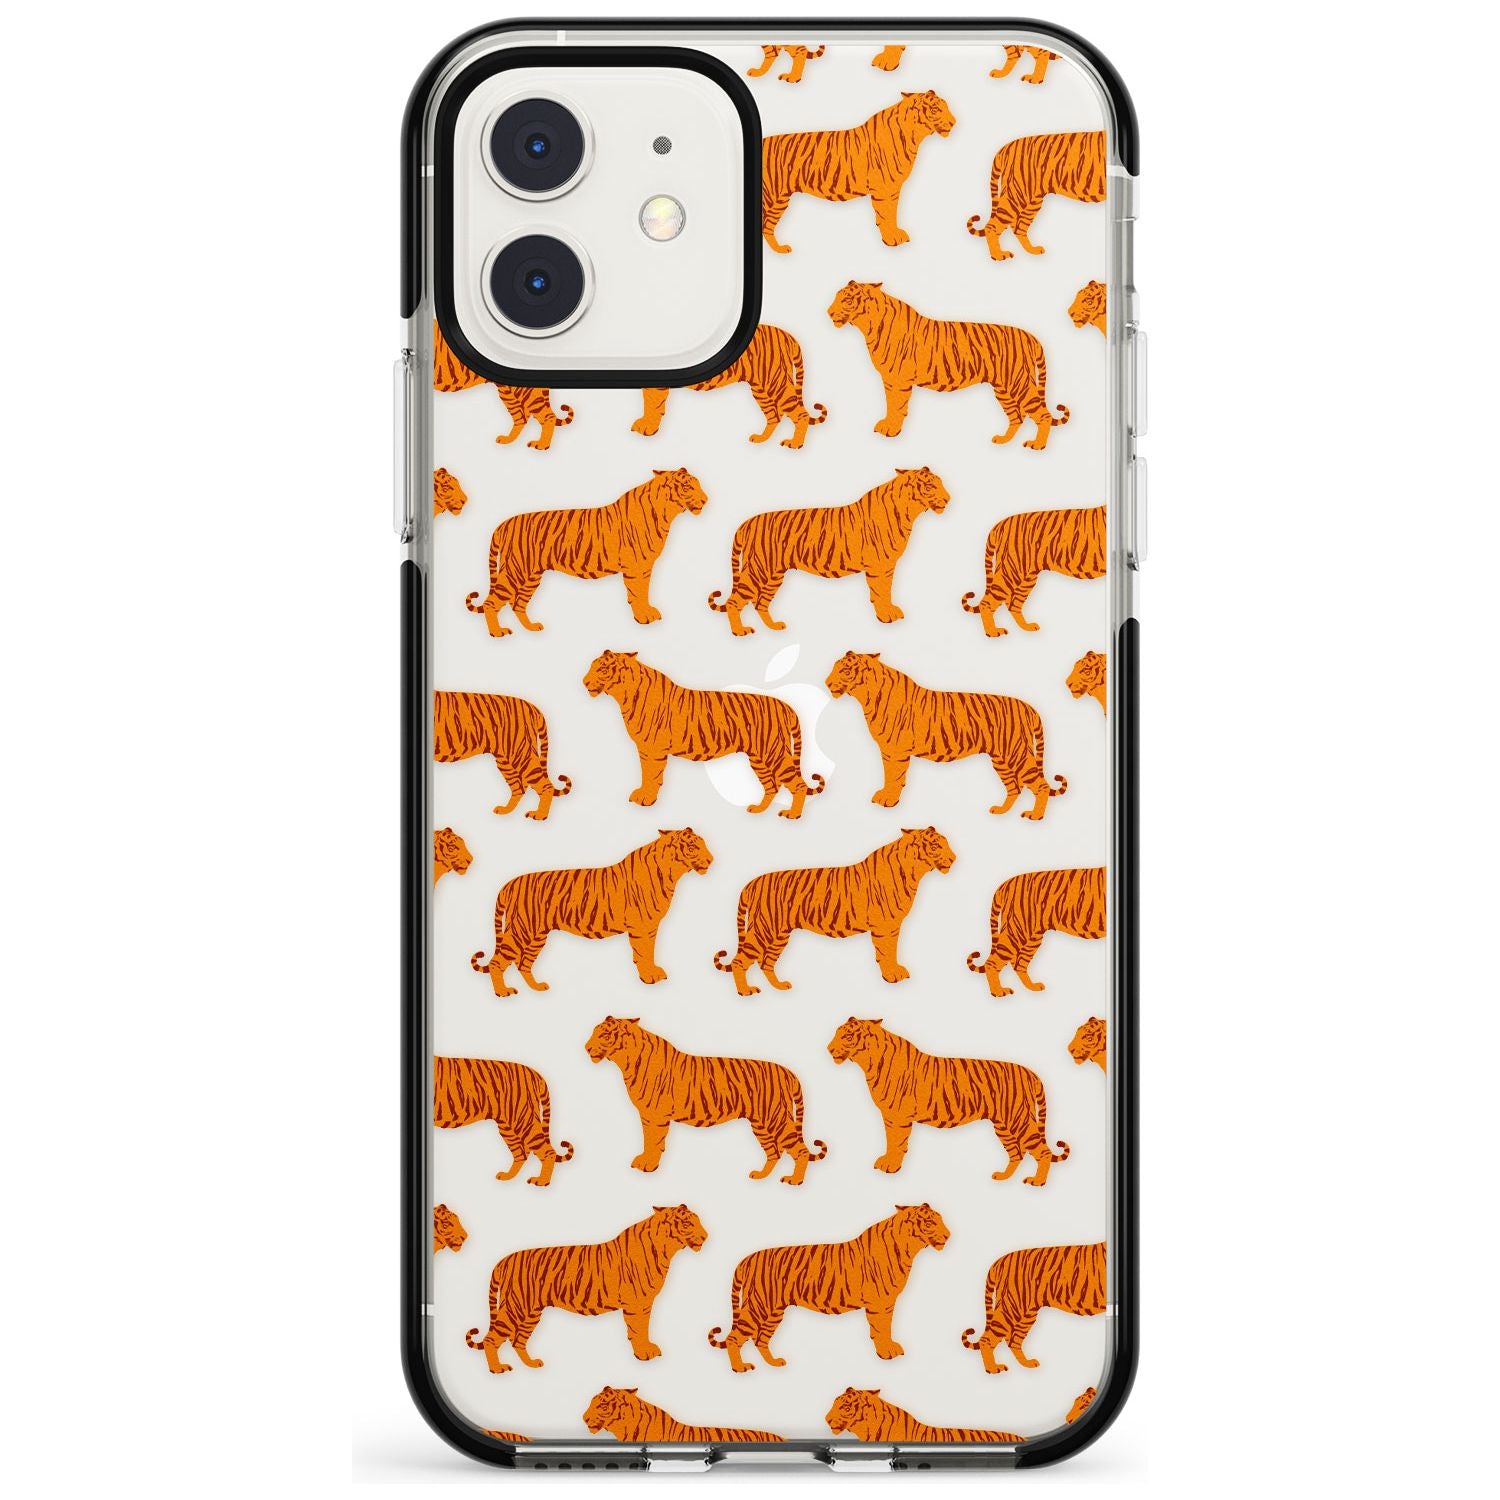 Tigers on Clear Pattern Black Impact Phone Case for iPhone 11